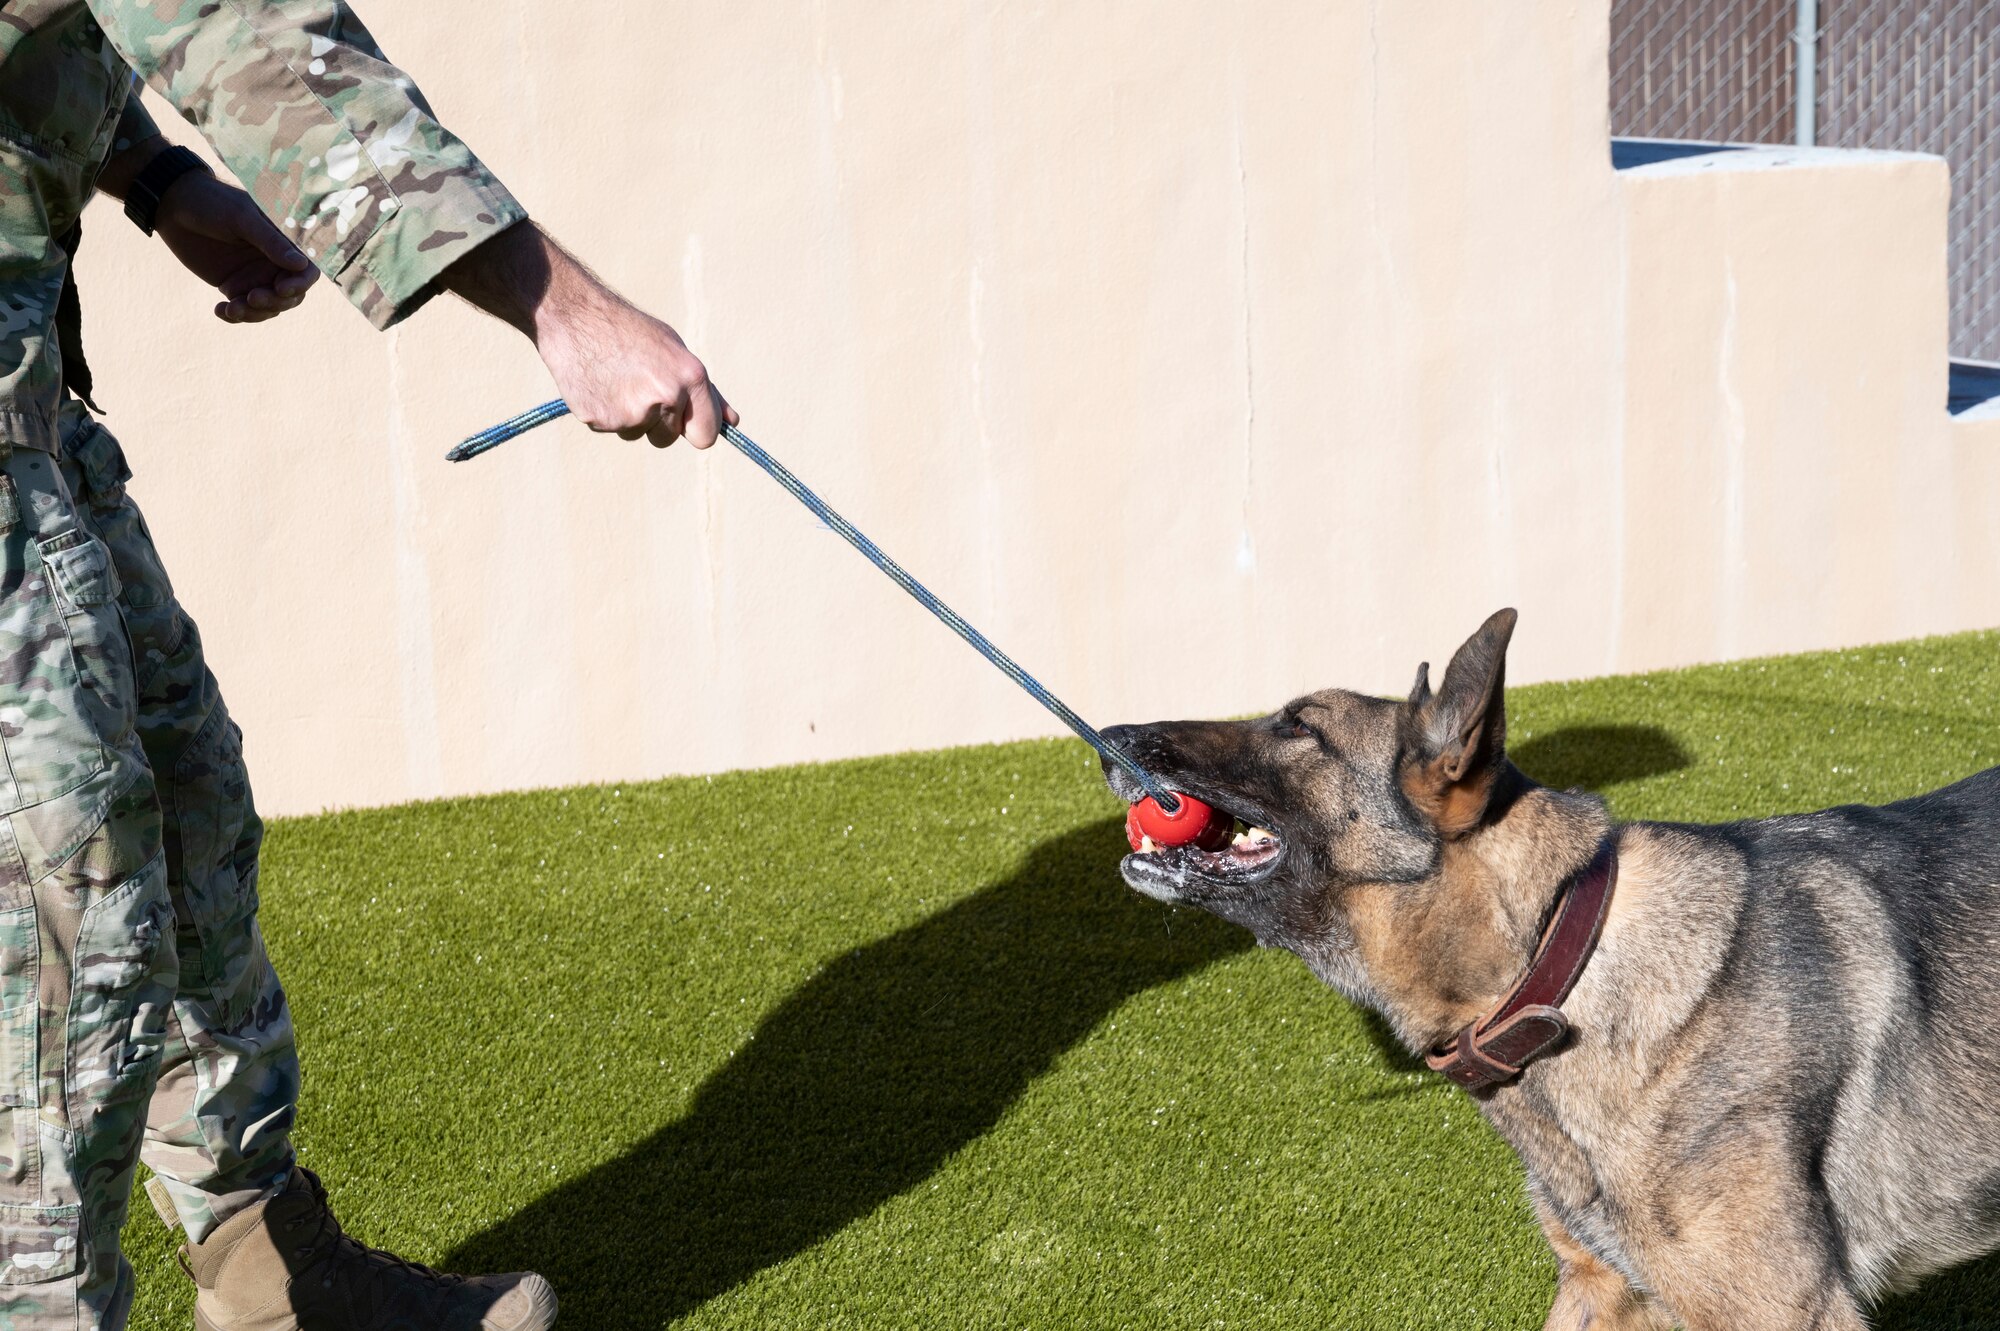 U.S. Air Force Staff Sgt. Charles Gaines, 47th Security Forces Squadron military working dog trainer, rewards Tuko, a military working dog, with a dog toy for a successful training routine at the 47th Security Forces Squadron military working dog training area at Laughlin Air Force Base, Texas, on Jan. 13, 2023. MWD handlers employ their dogs to conduct vehicle searches, and searches of open areas, buildings, and other locations for the detection of suspects, explosives or illegal drugs. (U.S. Air Force photo by Airman 1st Class Kailee Reynolds)